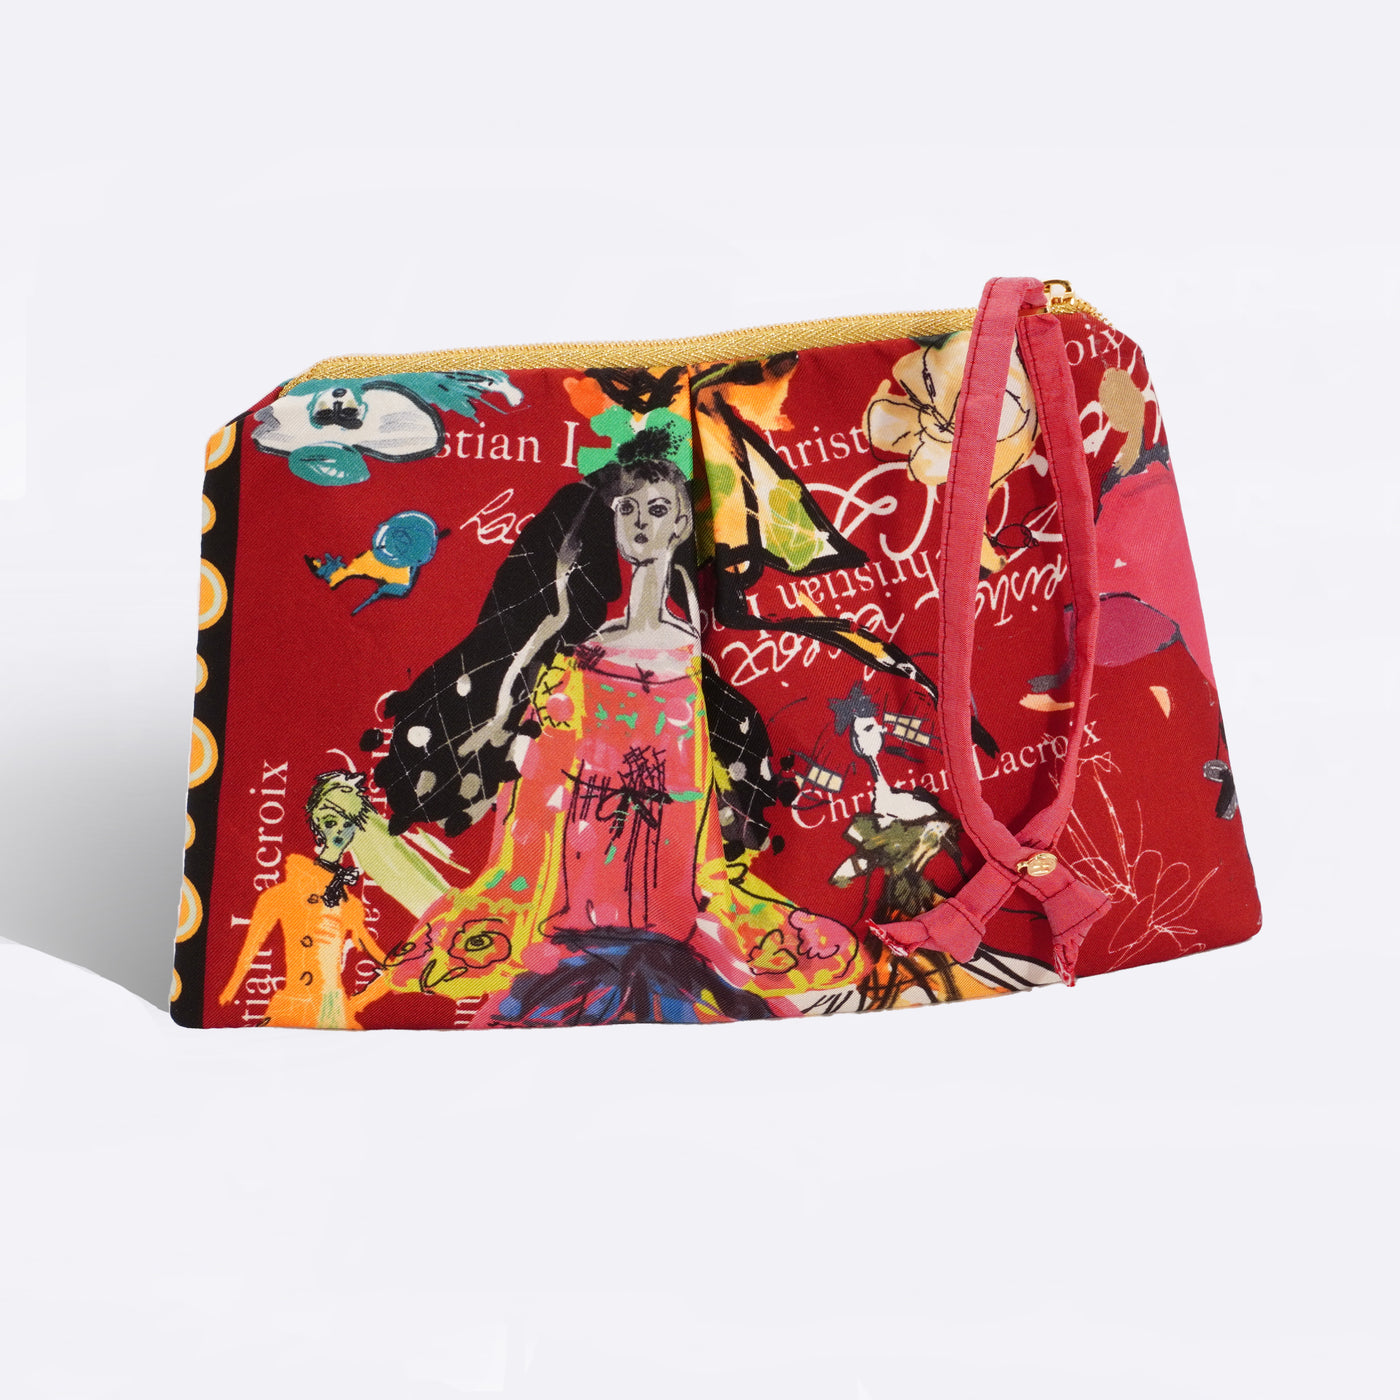 "De Moda" Scarf Bag (Upcycled from Christian LaCroix Scarf) Party Clutch Hampton Road Designs   